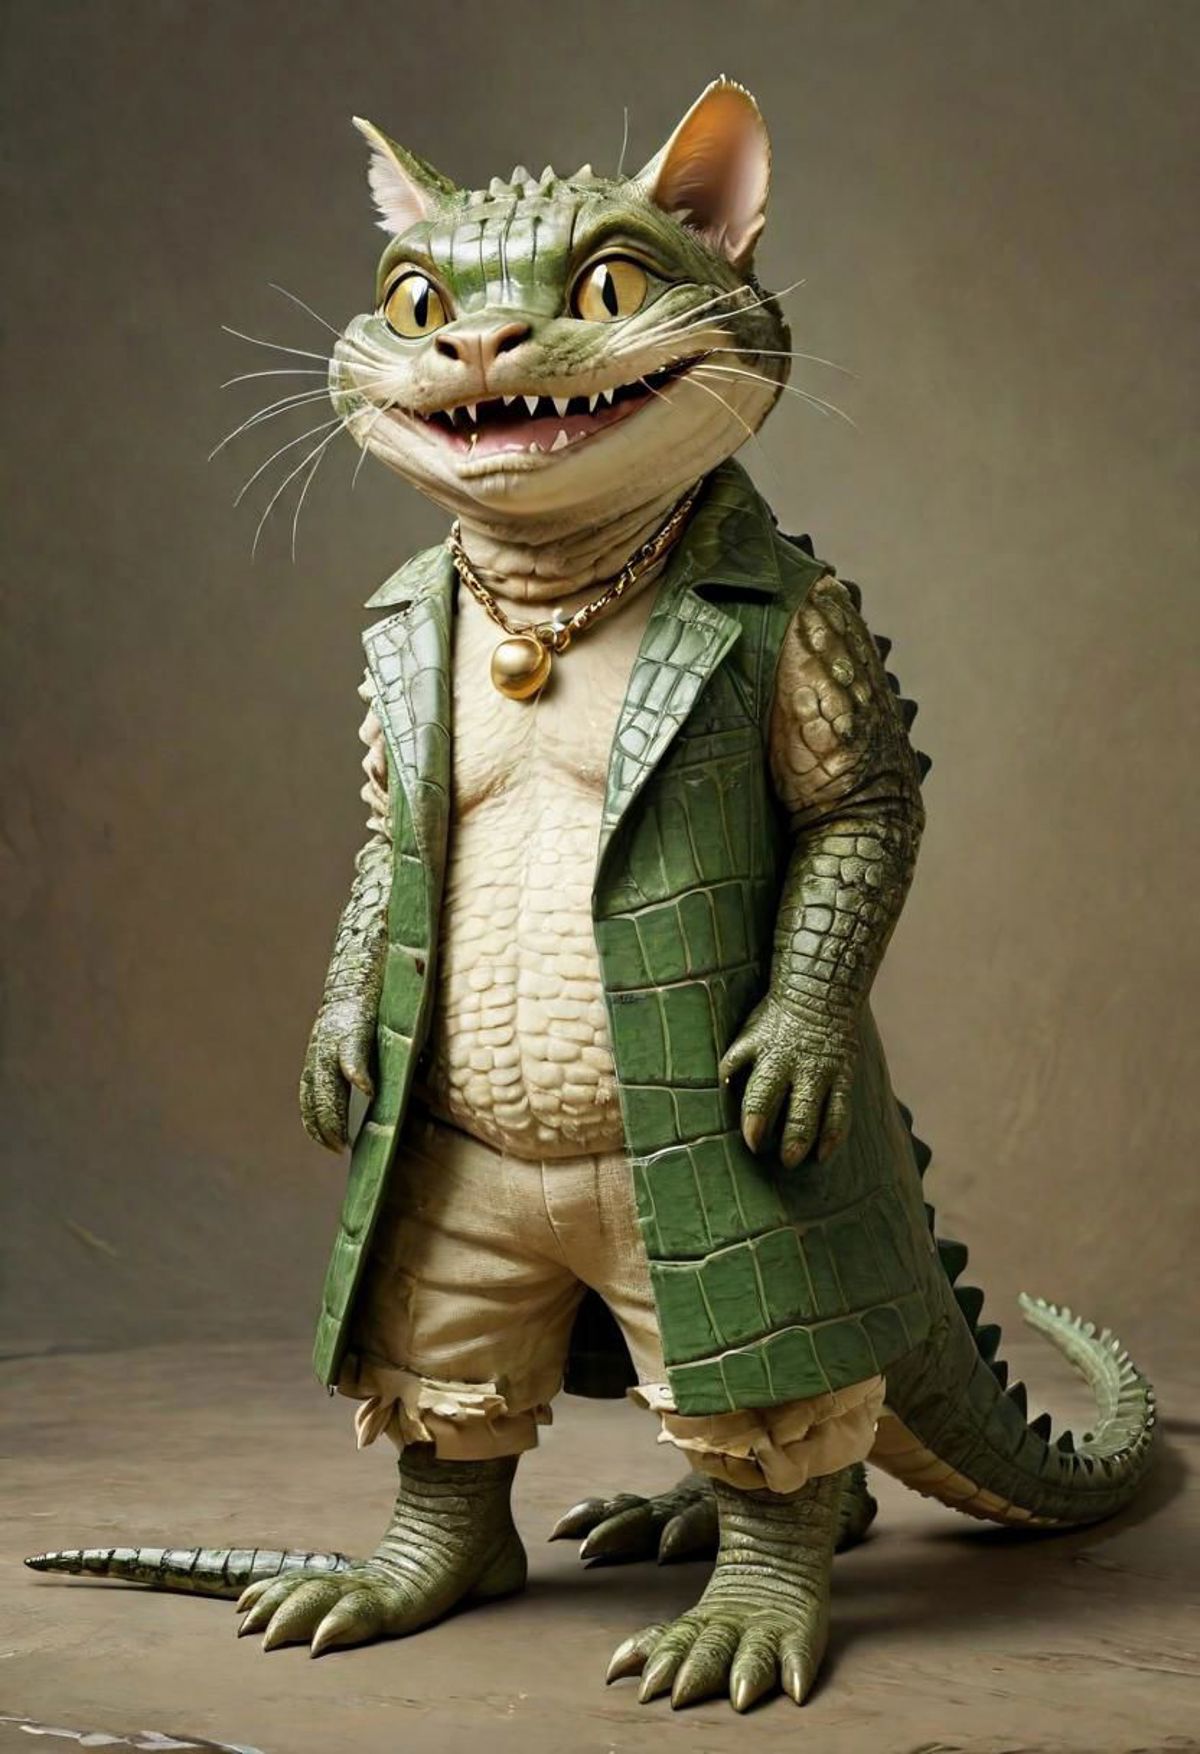 A stuffed lizard or reptile with a green shirt and shorts on.